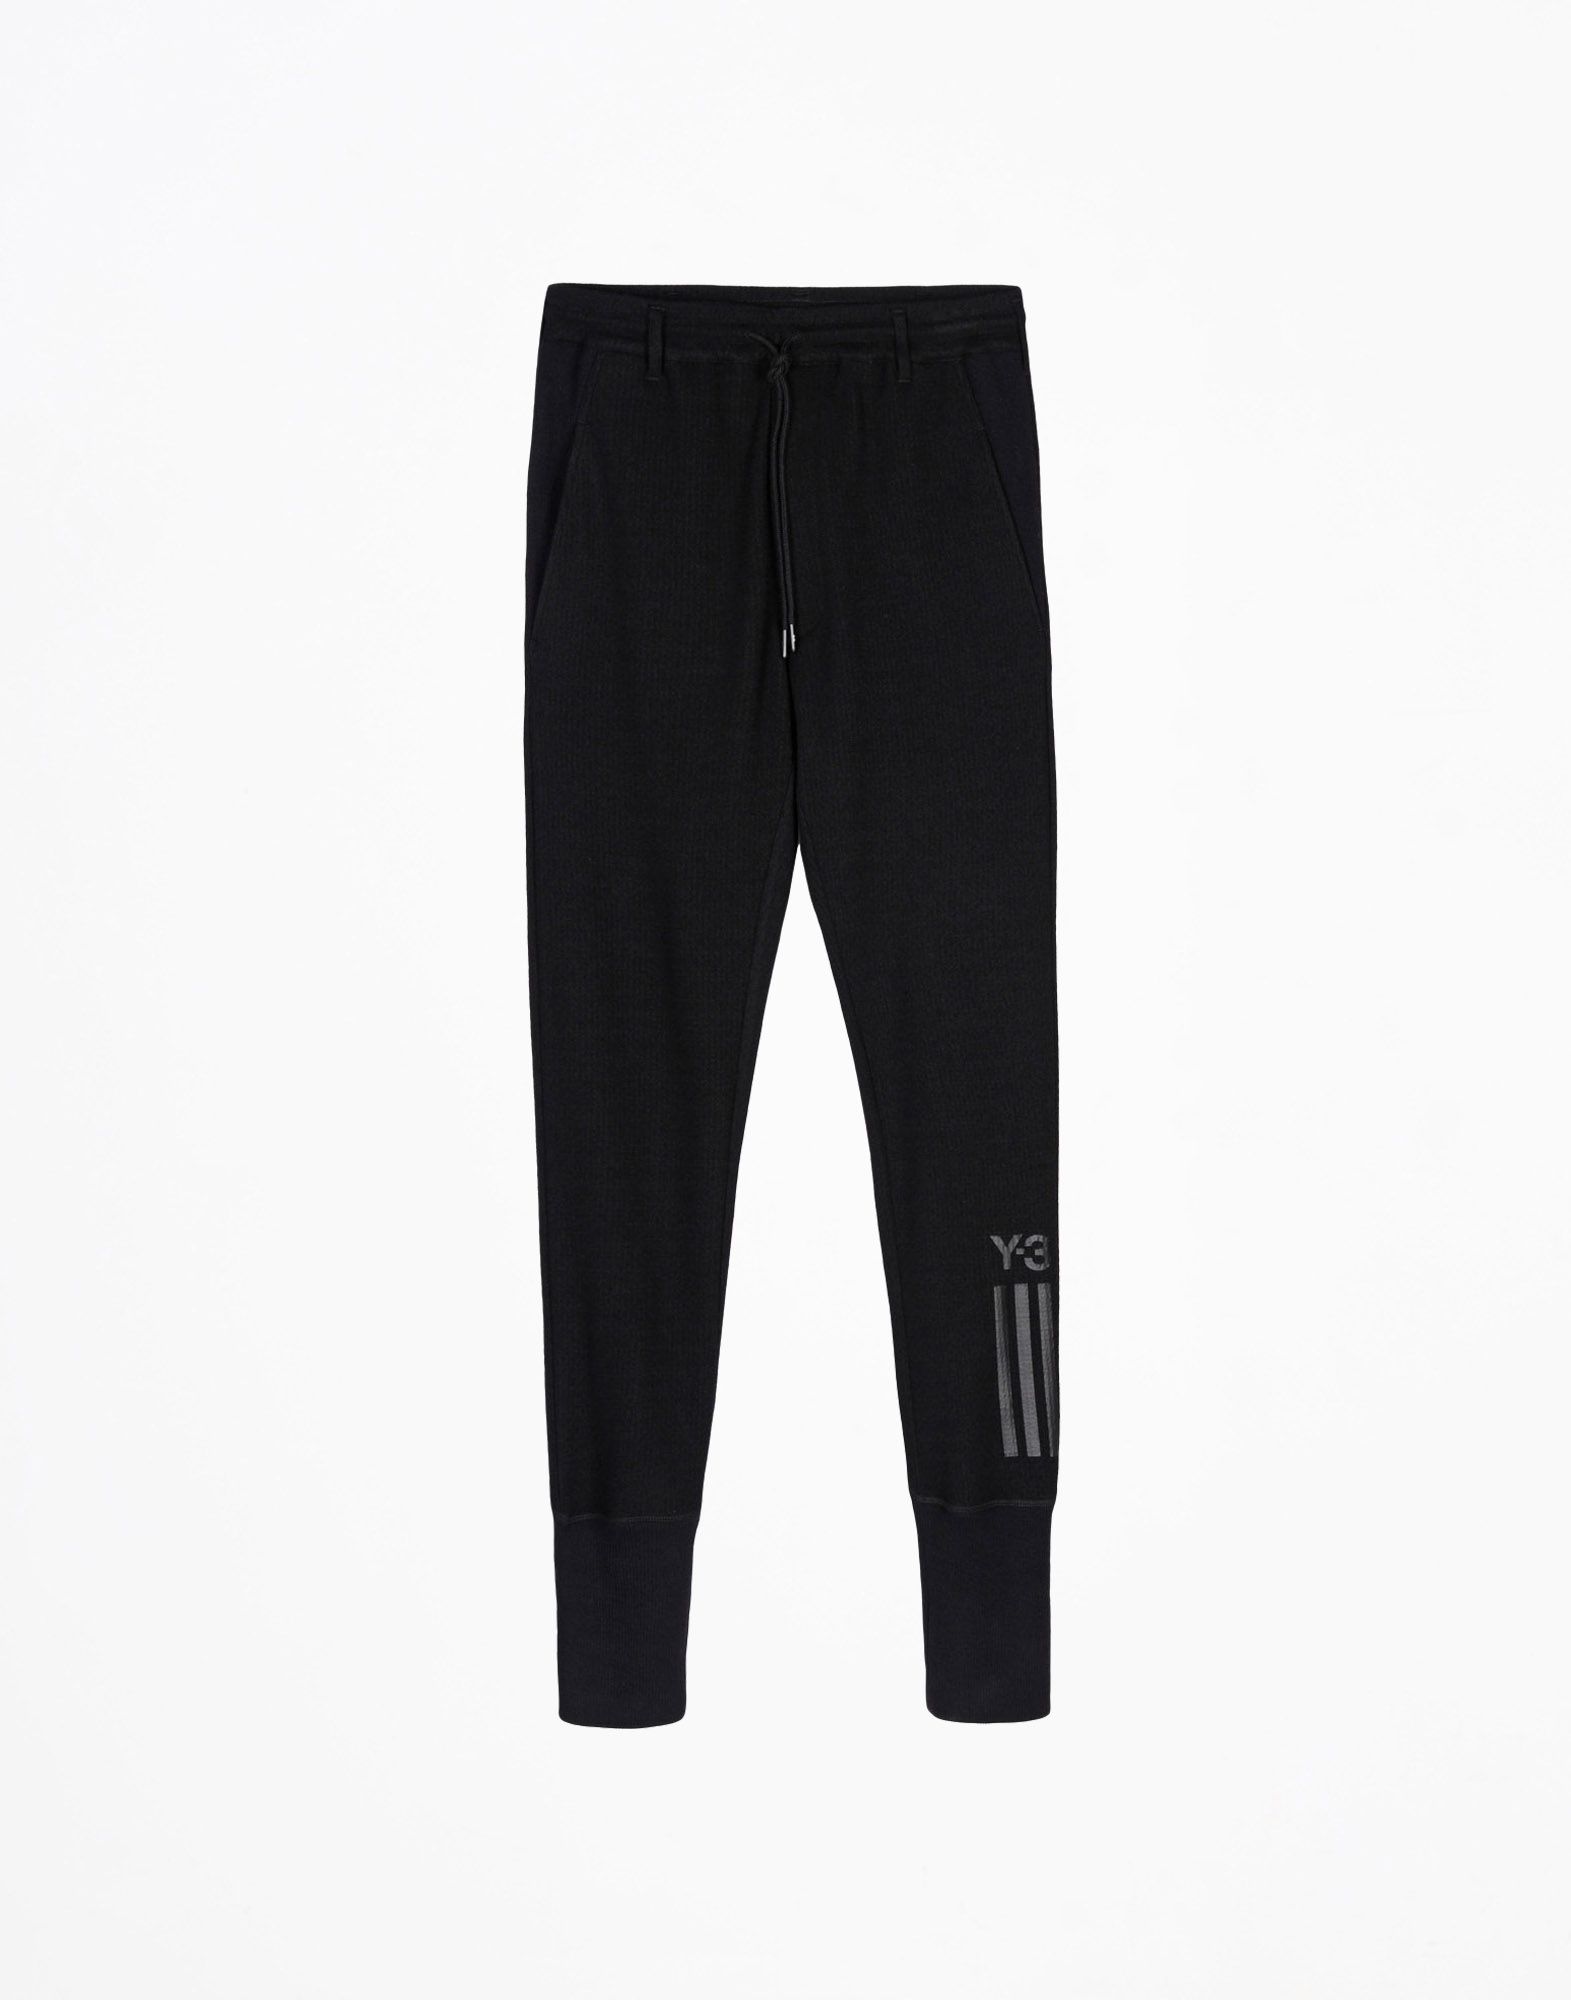 Y 3 WOOL JERSEY PANT for Men | Adidas Y-3 Official Store